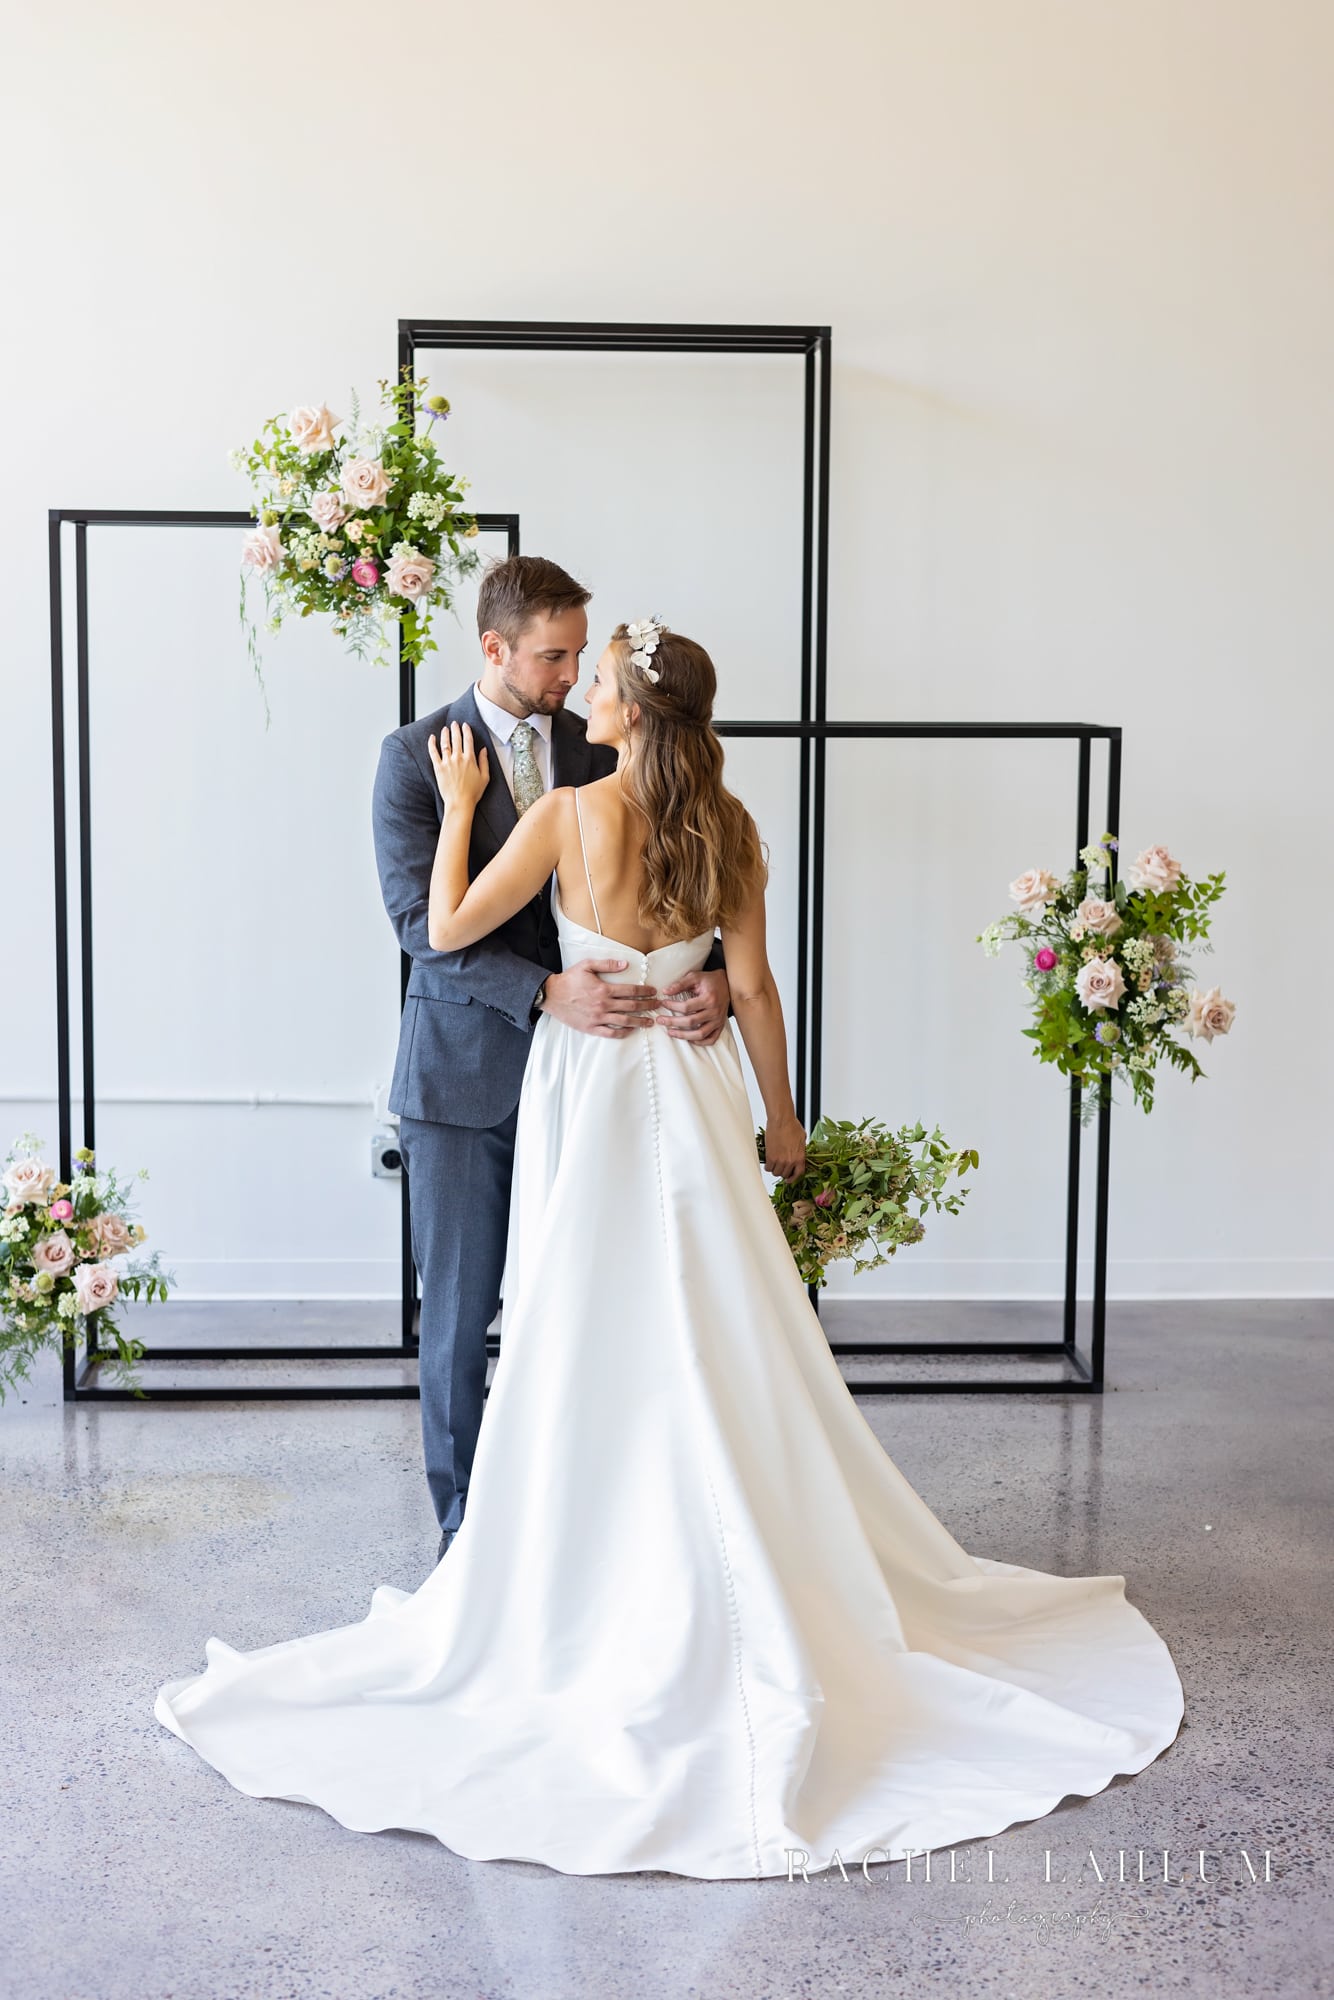 Bride faces groom in front of floral fixture during stylized shoot at Urgan Daisy. 